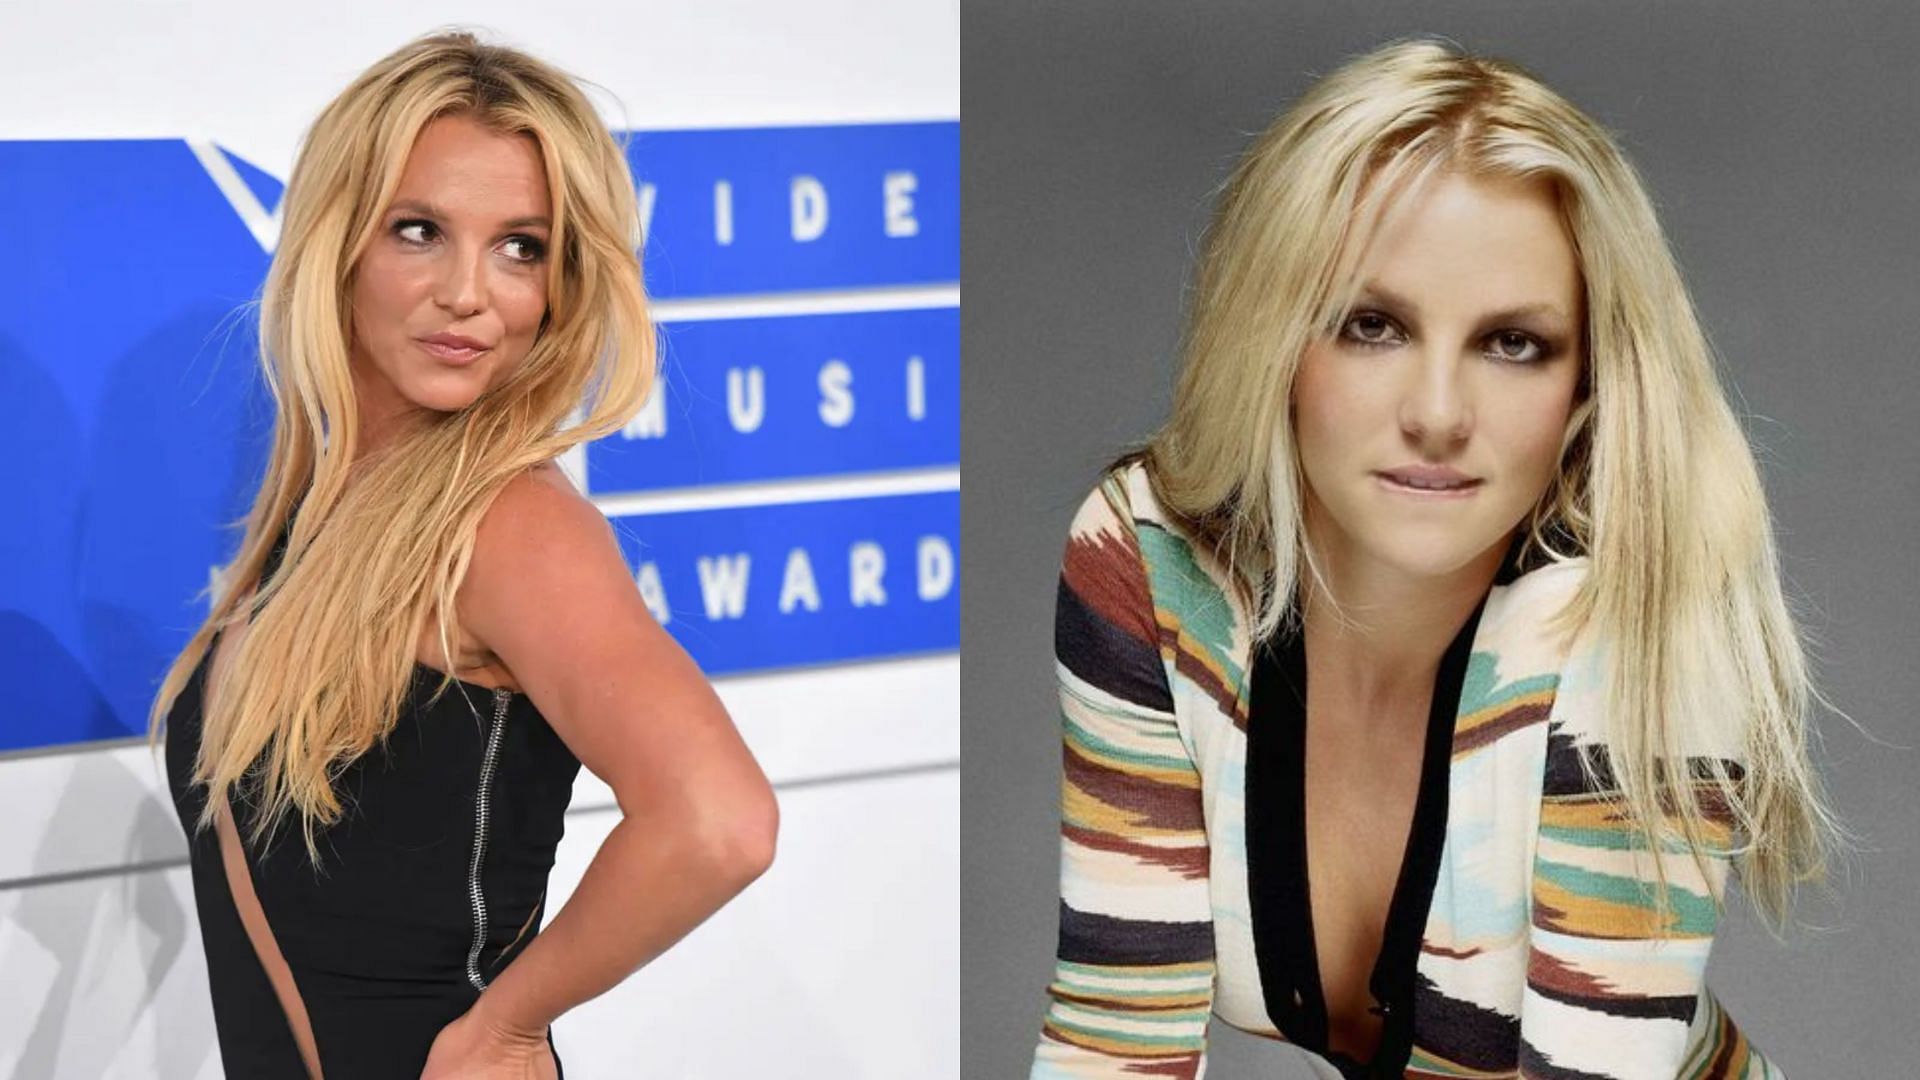 Britney Spears told a WWE legend that he was her hero